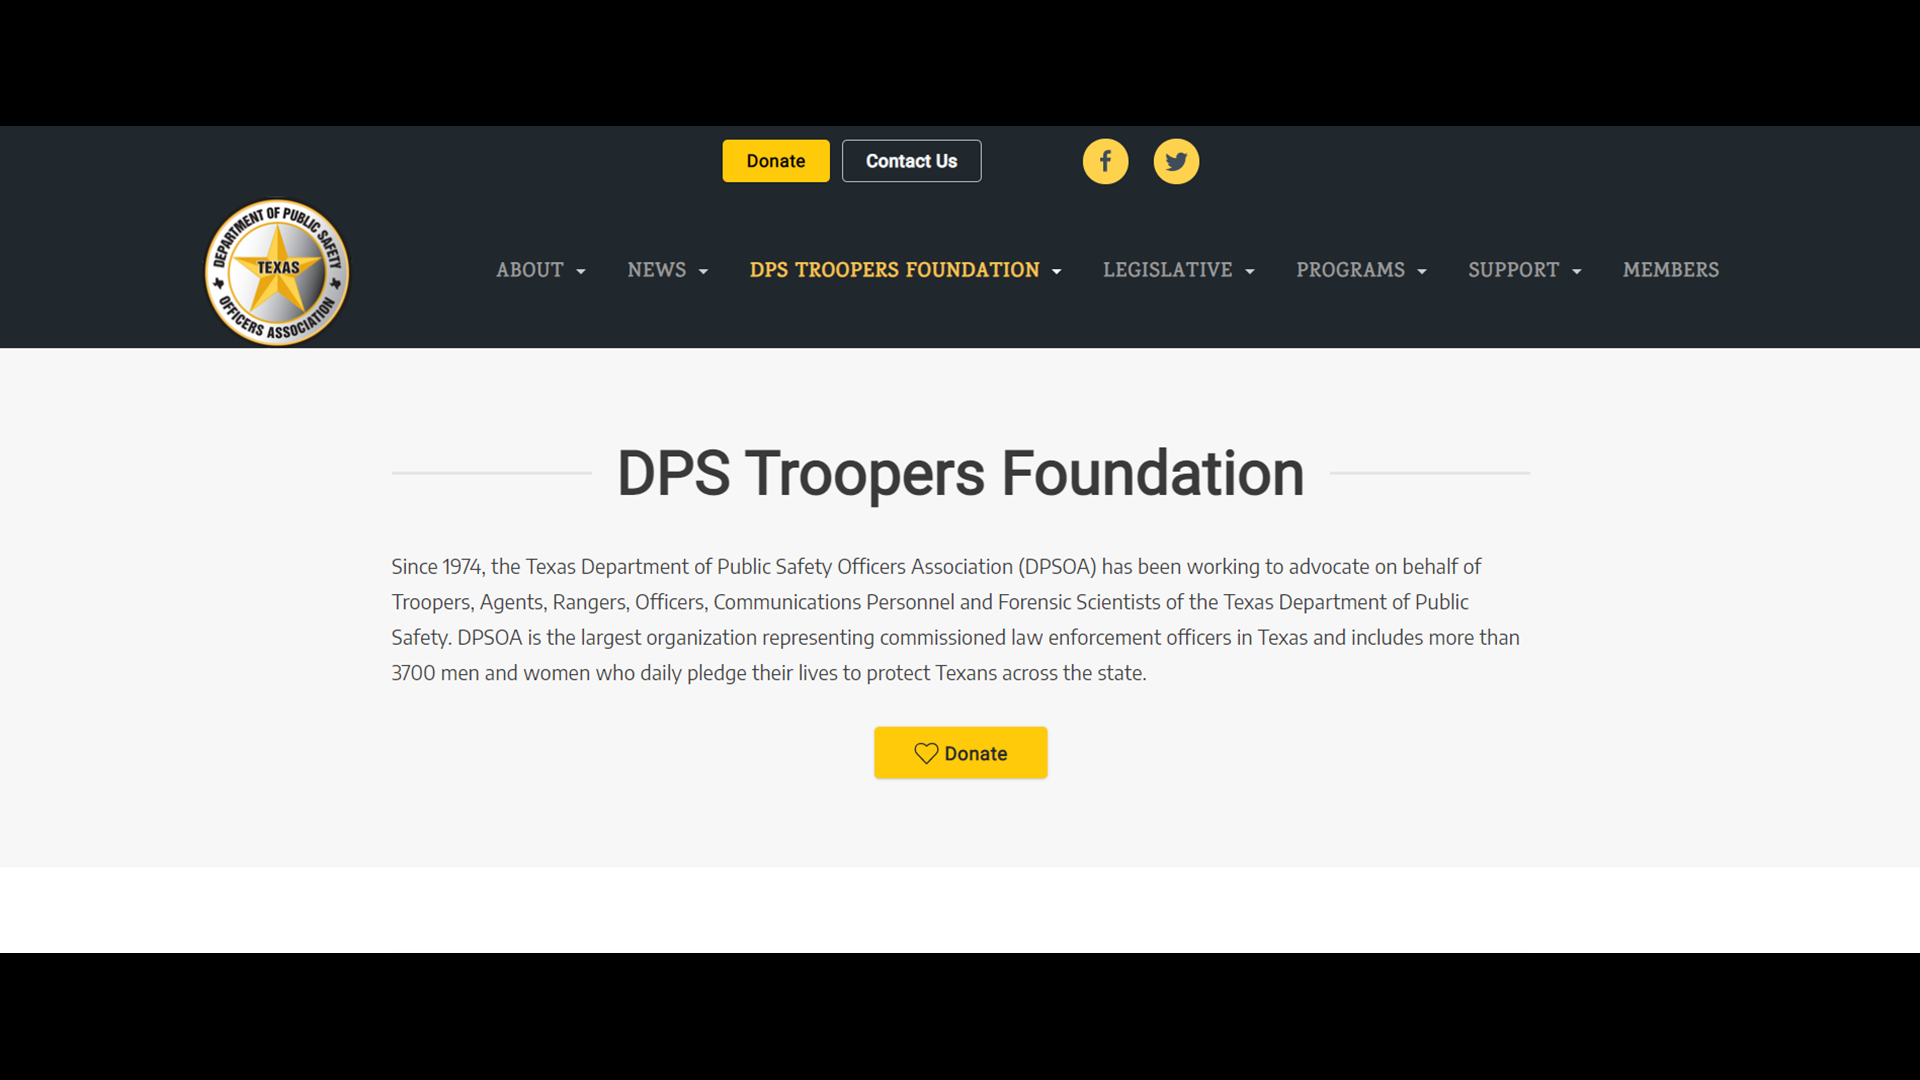 The DPS Troopers Foundation is now collecting $25,000 for the Walker family. The foundation offers multiple resources to troopers and their families.